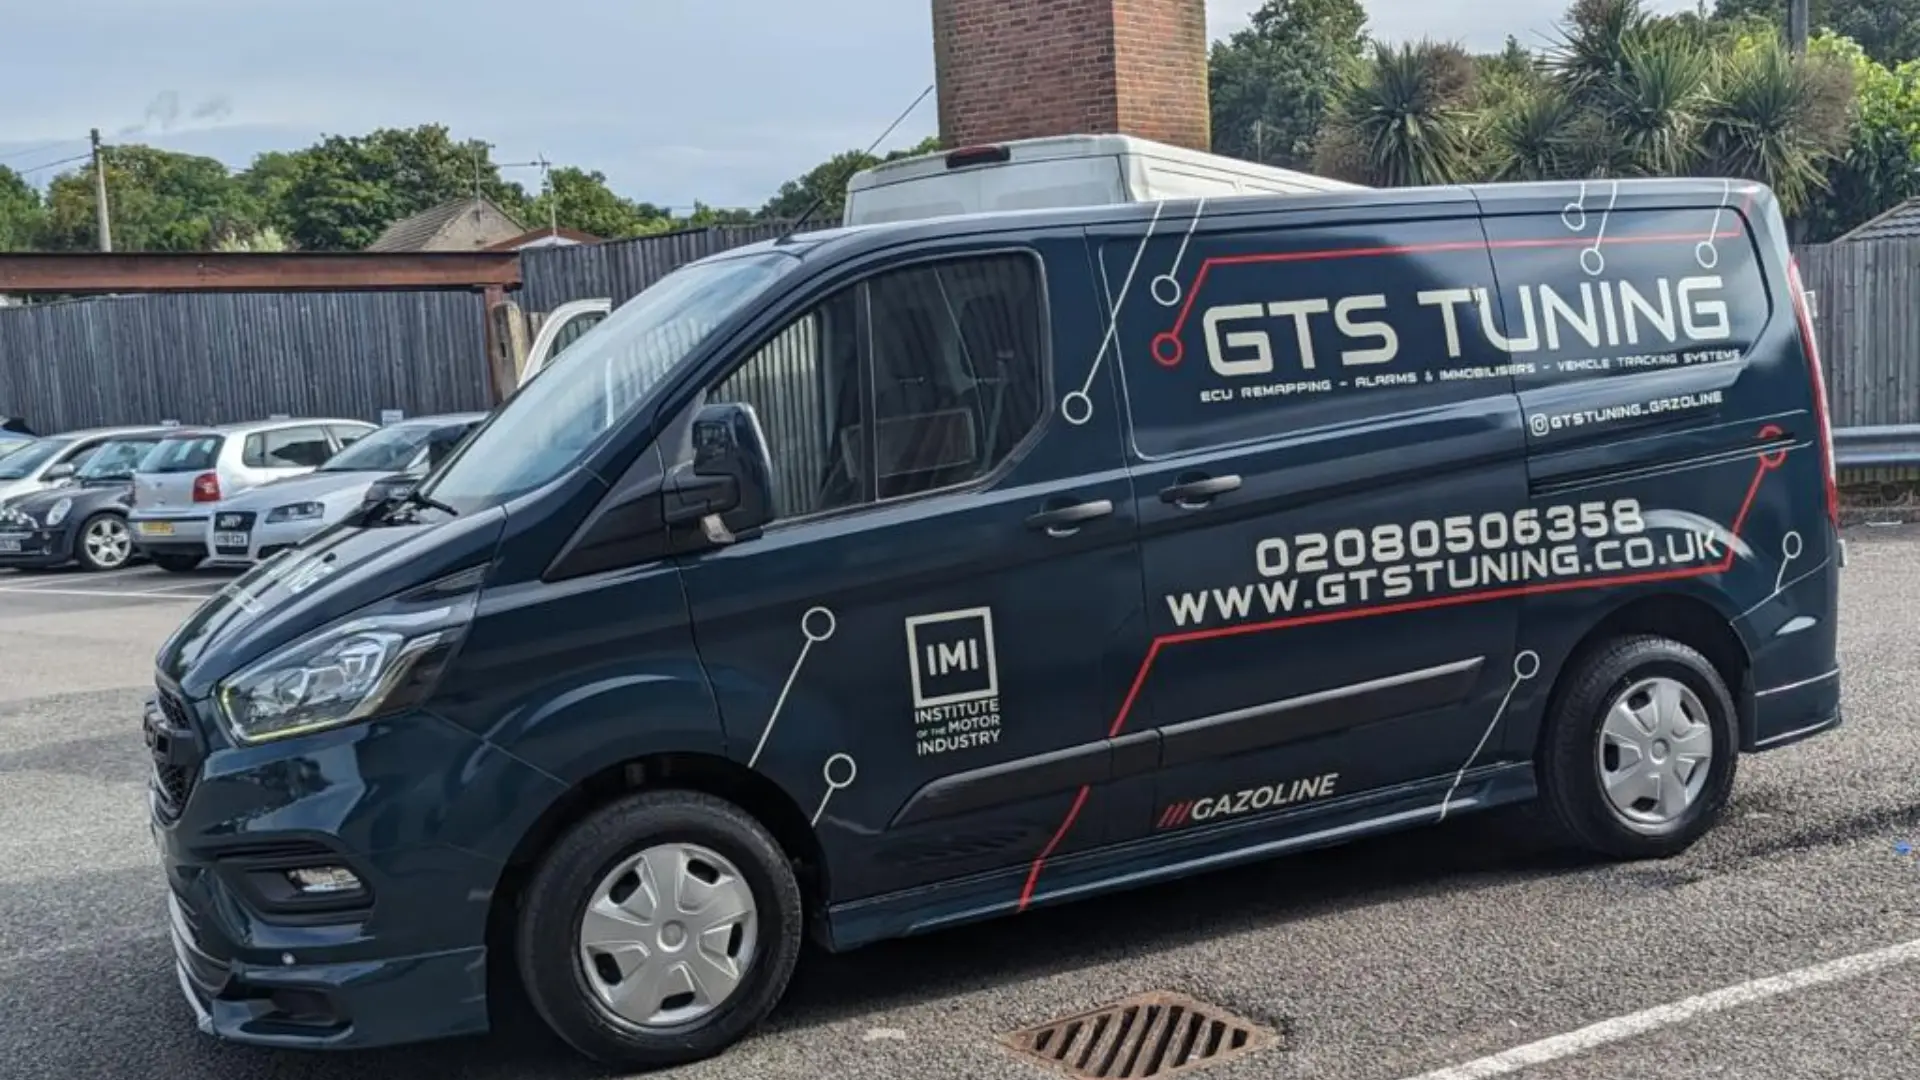 gts tuning van homepage hero section with background image